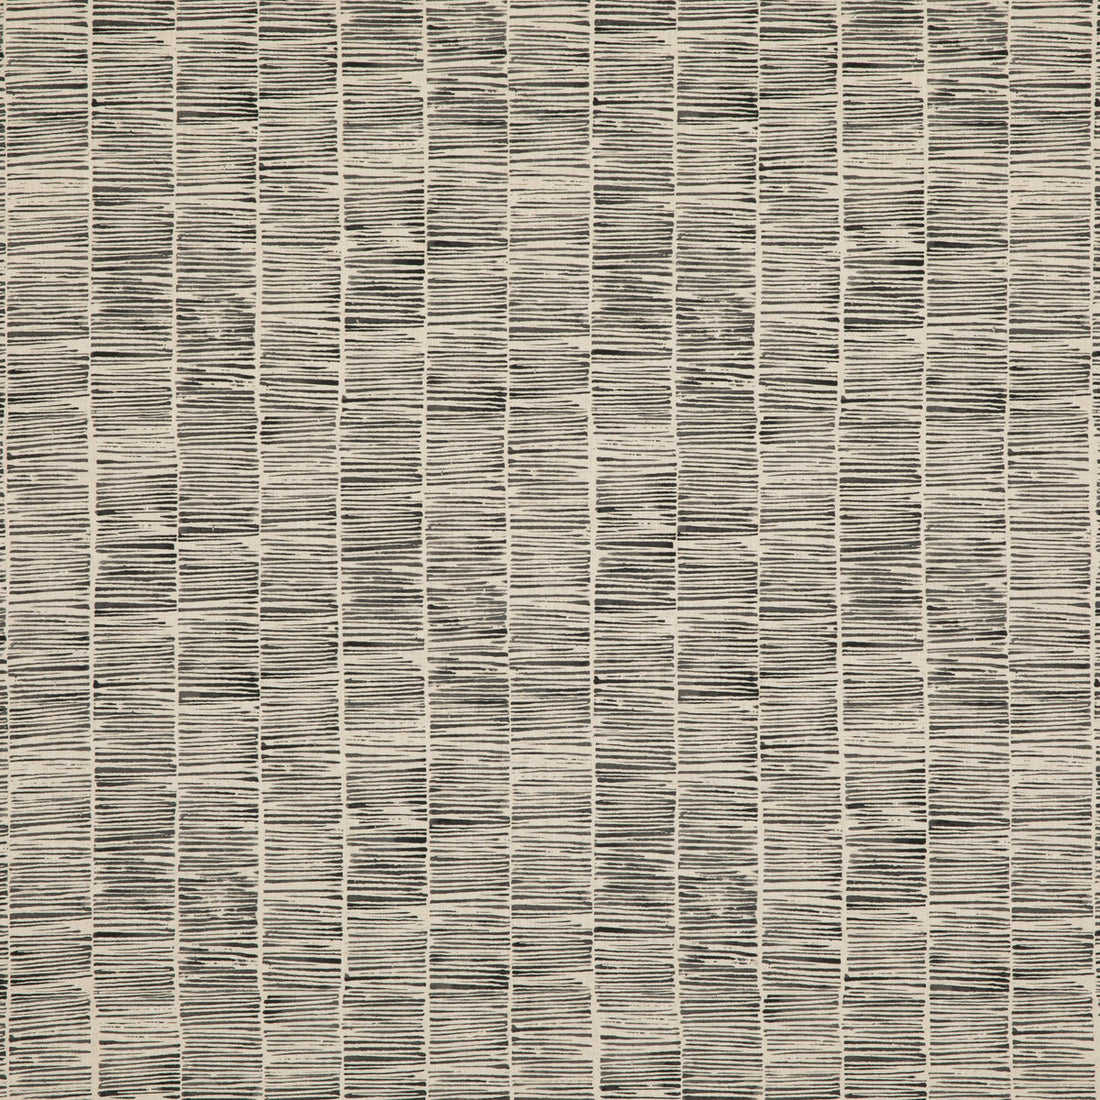 Etching fabric in charcoal color - pattern ED75044.2.0 - by Threads in the Nala Prints collection